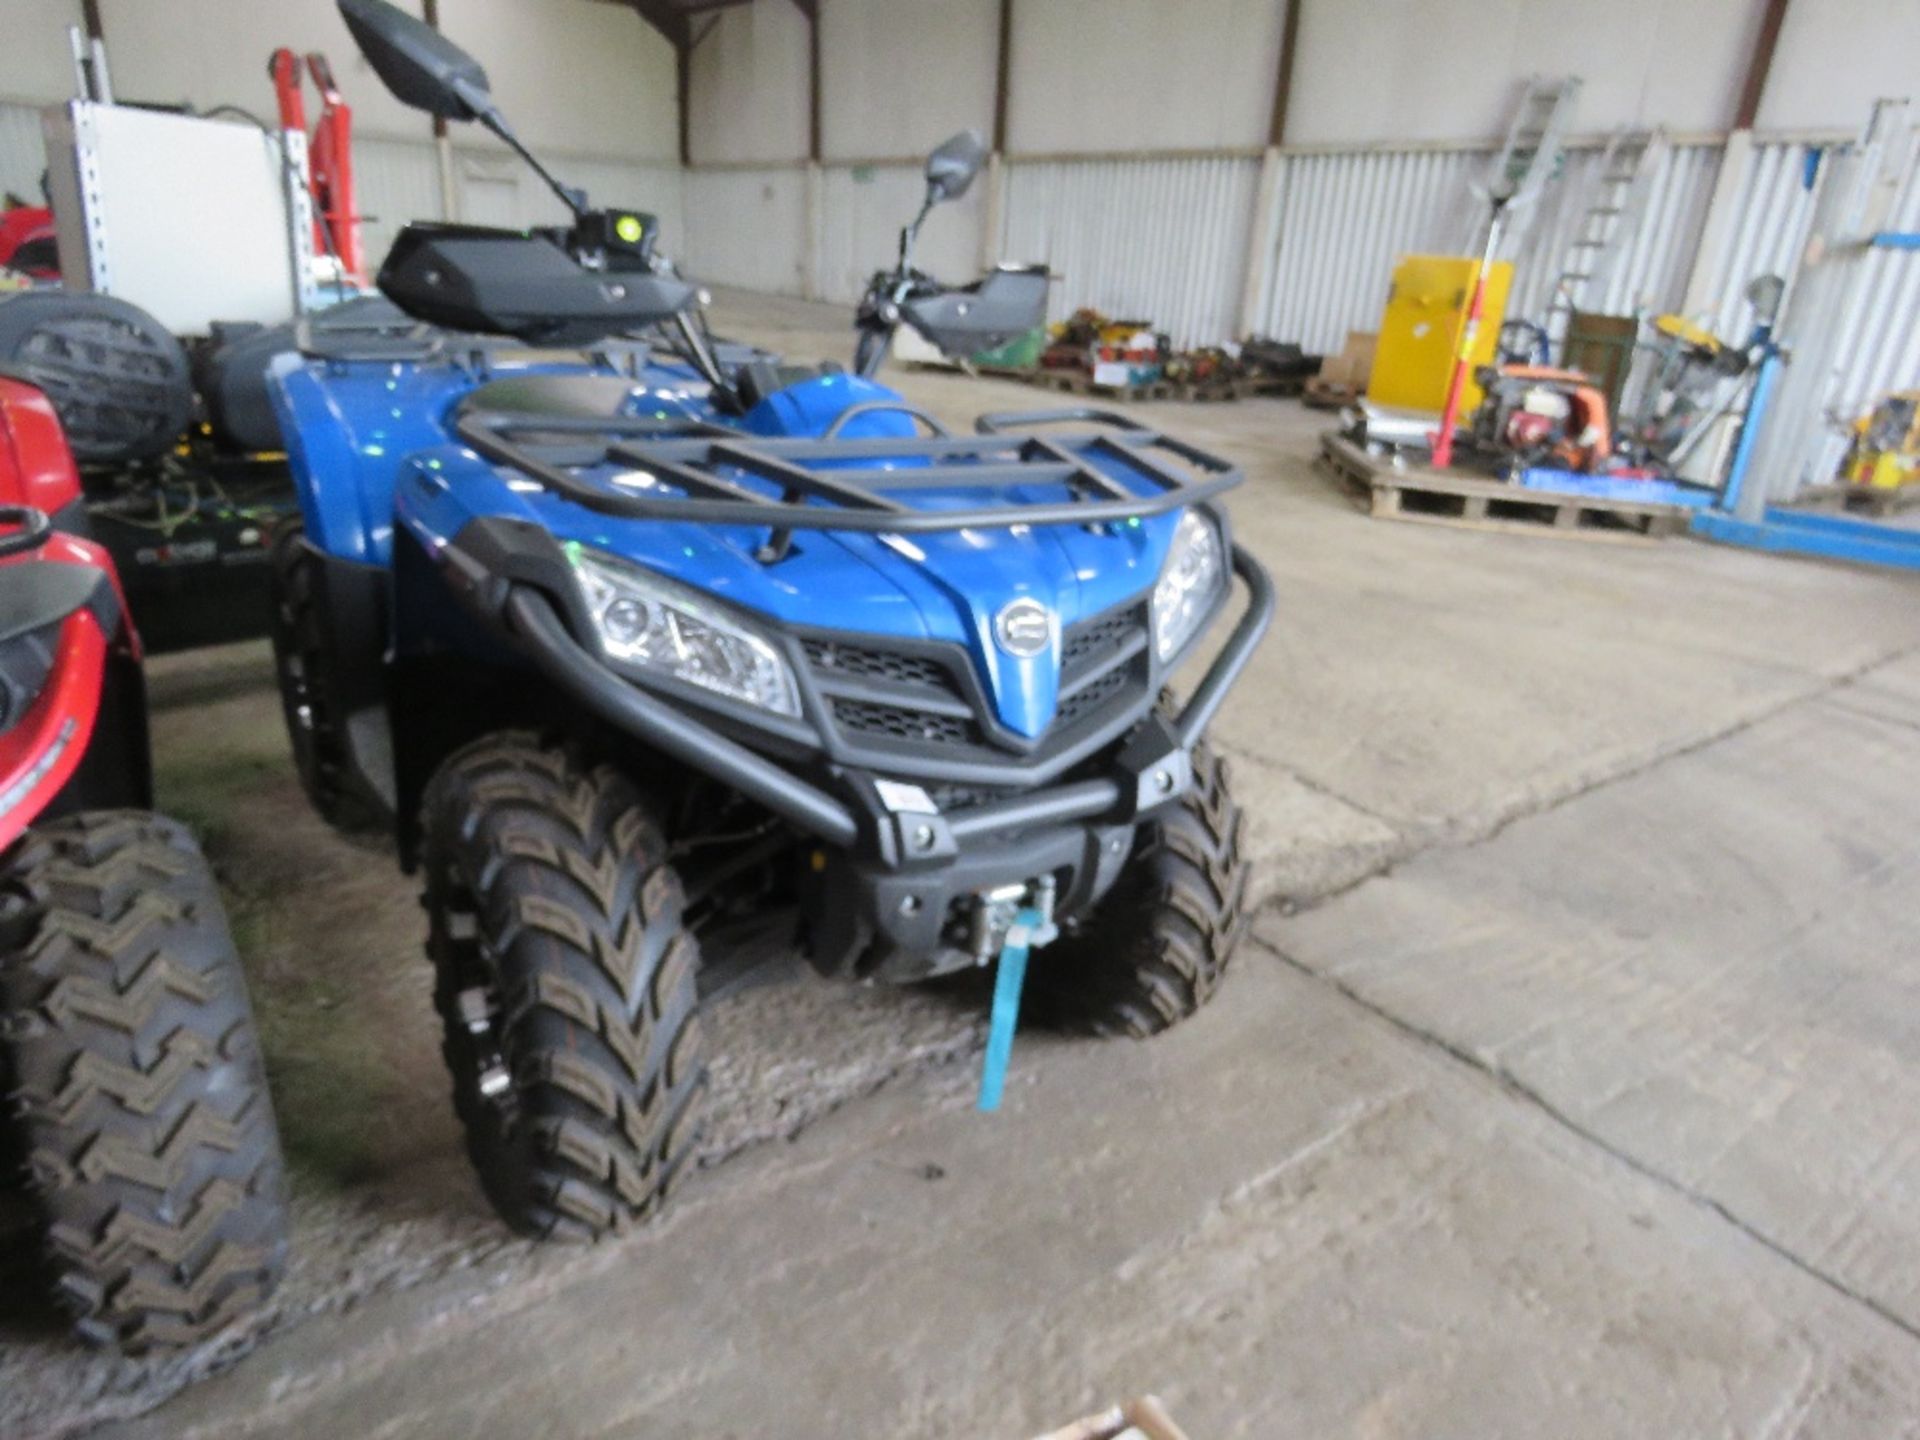 CFMOTO/QUADZILLA 450 4WD QUAD BIKE 4WD WITH WINCH. 7.8 REC MILES. WHEN TESTED WAS SEEN TO DRIVE, STE - Image 3 of 8